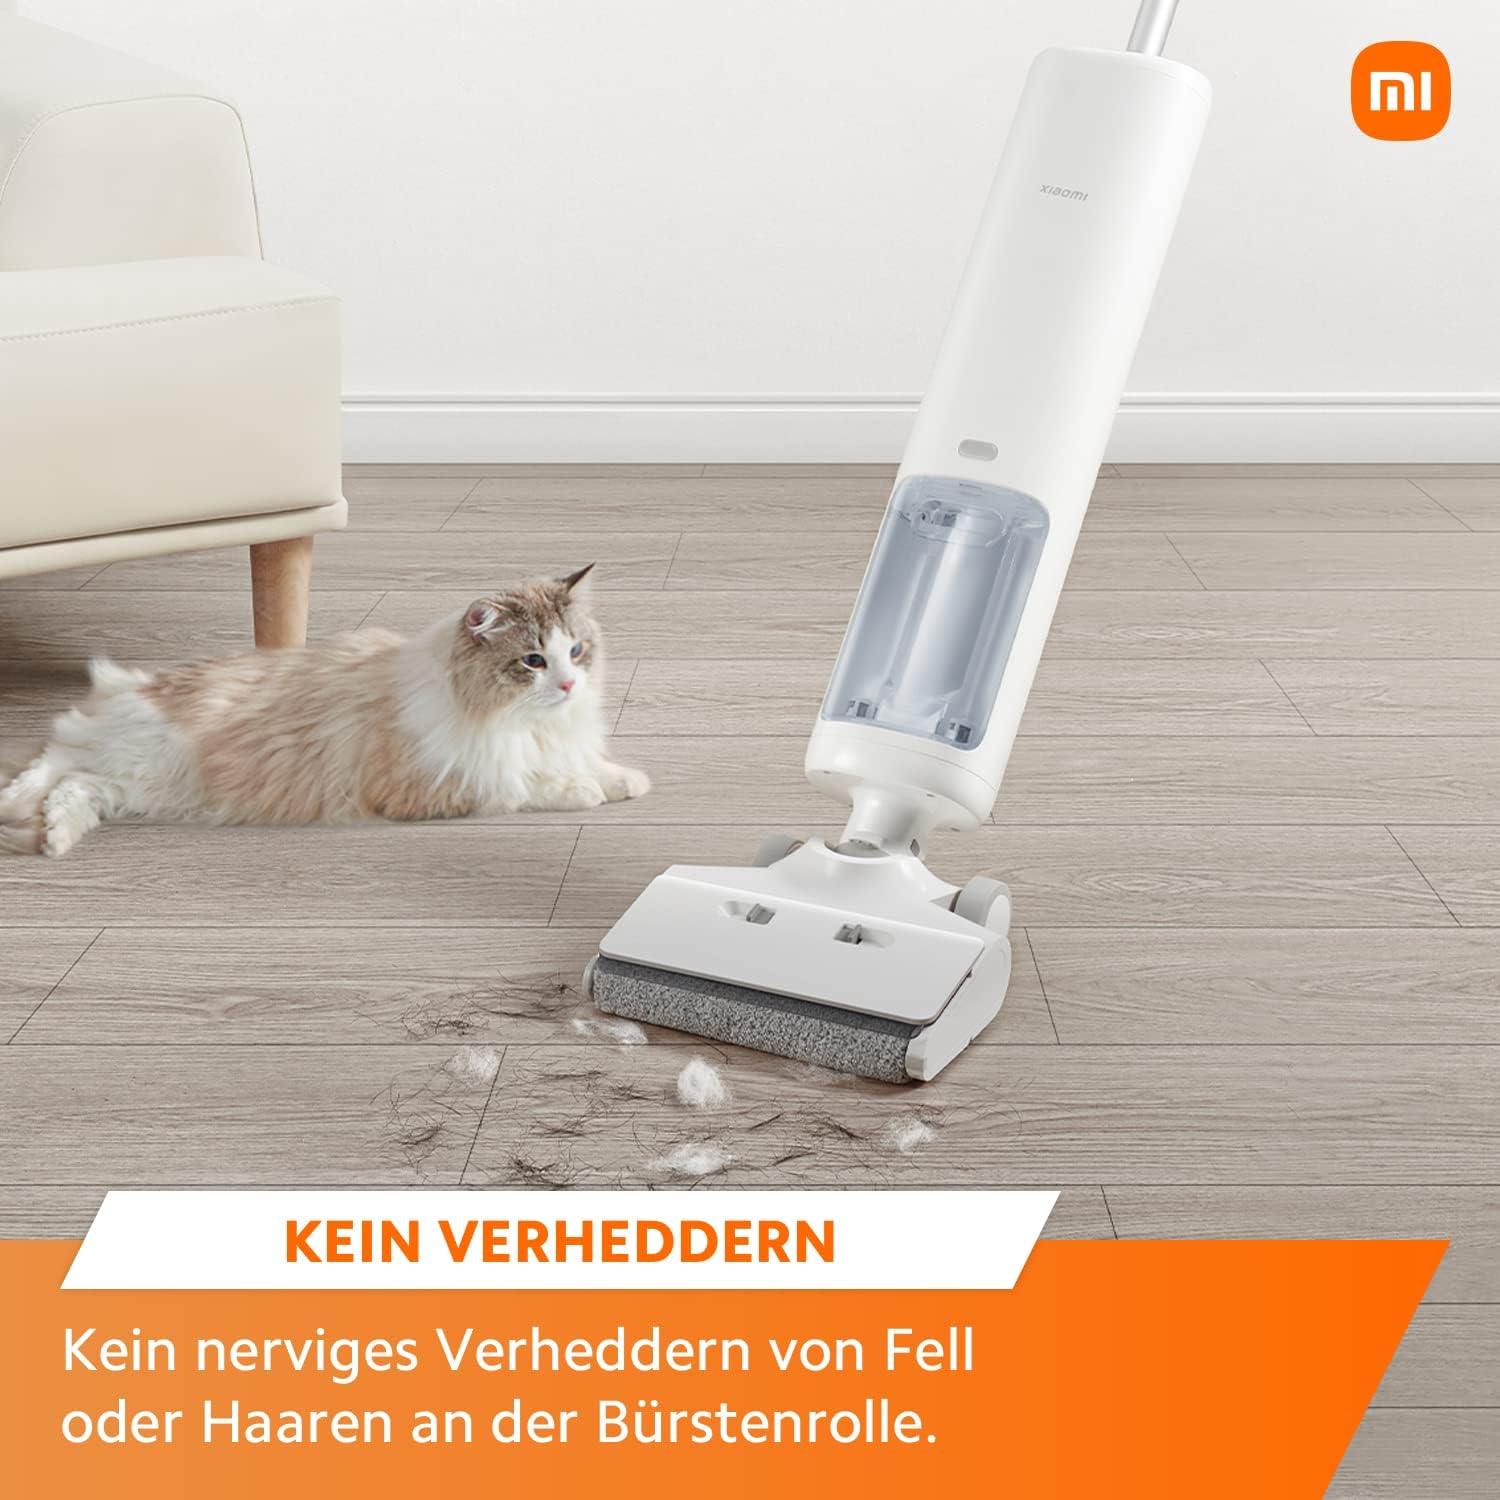 Xiaomi Truclean W10 Ultra Wet Dry Vacuum Wireless with Charging Dock| 3 In 1 Cleaning Wet,Dry And Washing Function,All-in-one auto-cleaning, water-refilling